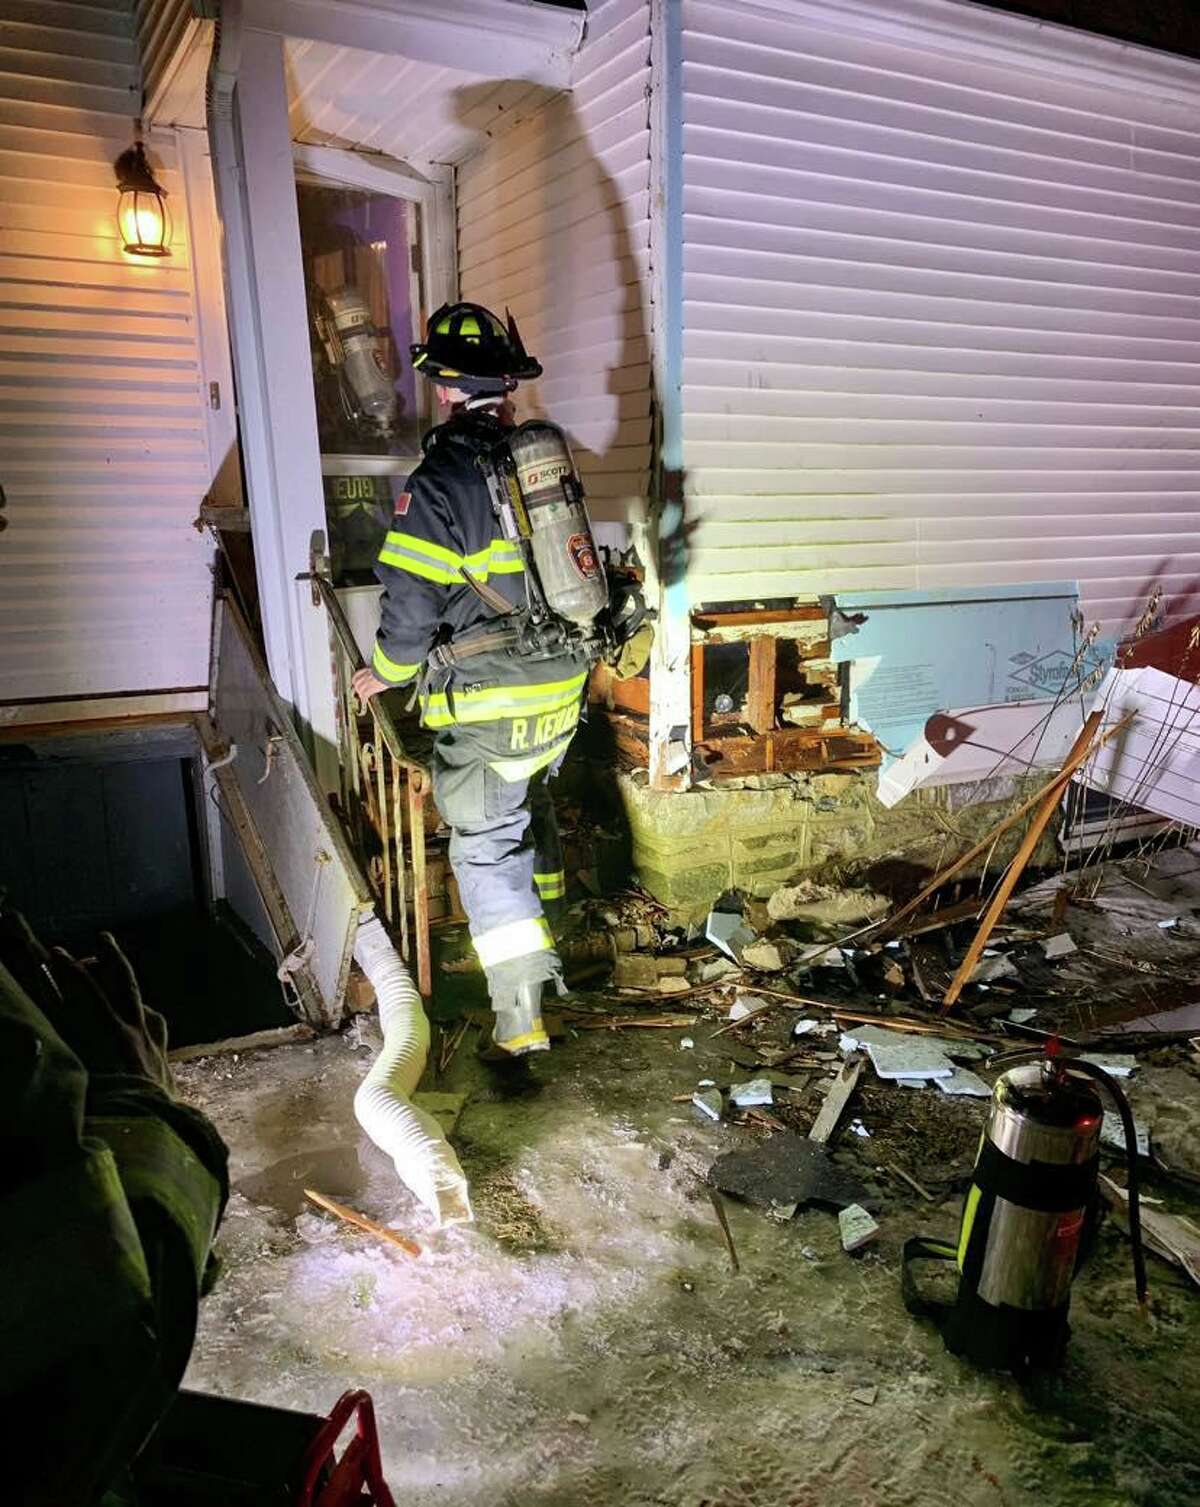 The Seymour Fire Department responded to a fire on Friday night after a homeowner used a garden torch to melt ice, accidentally setting fire to the home’s siding.